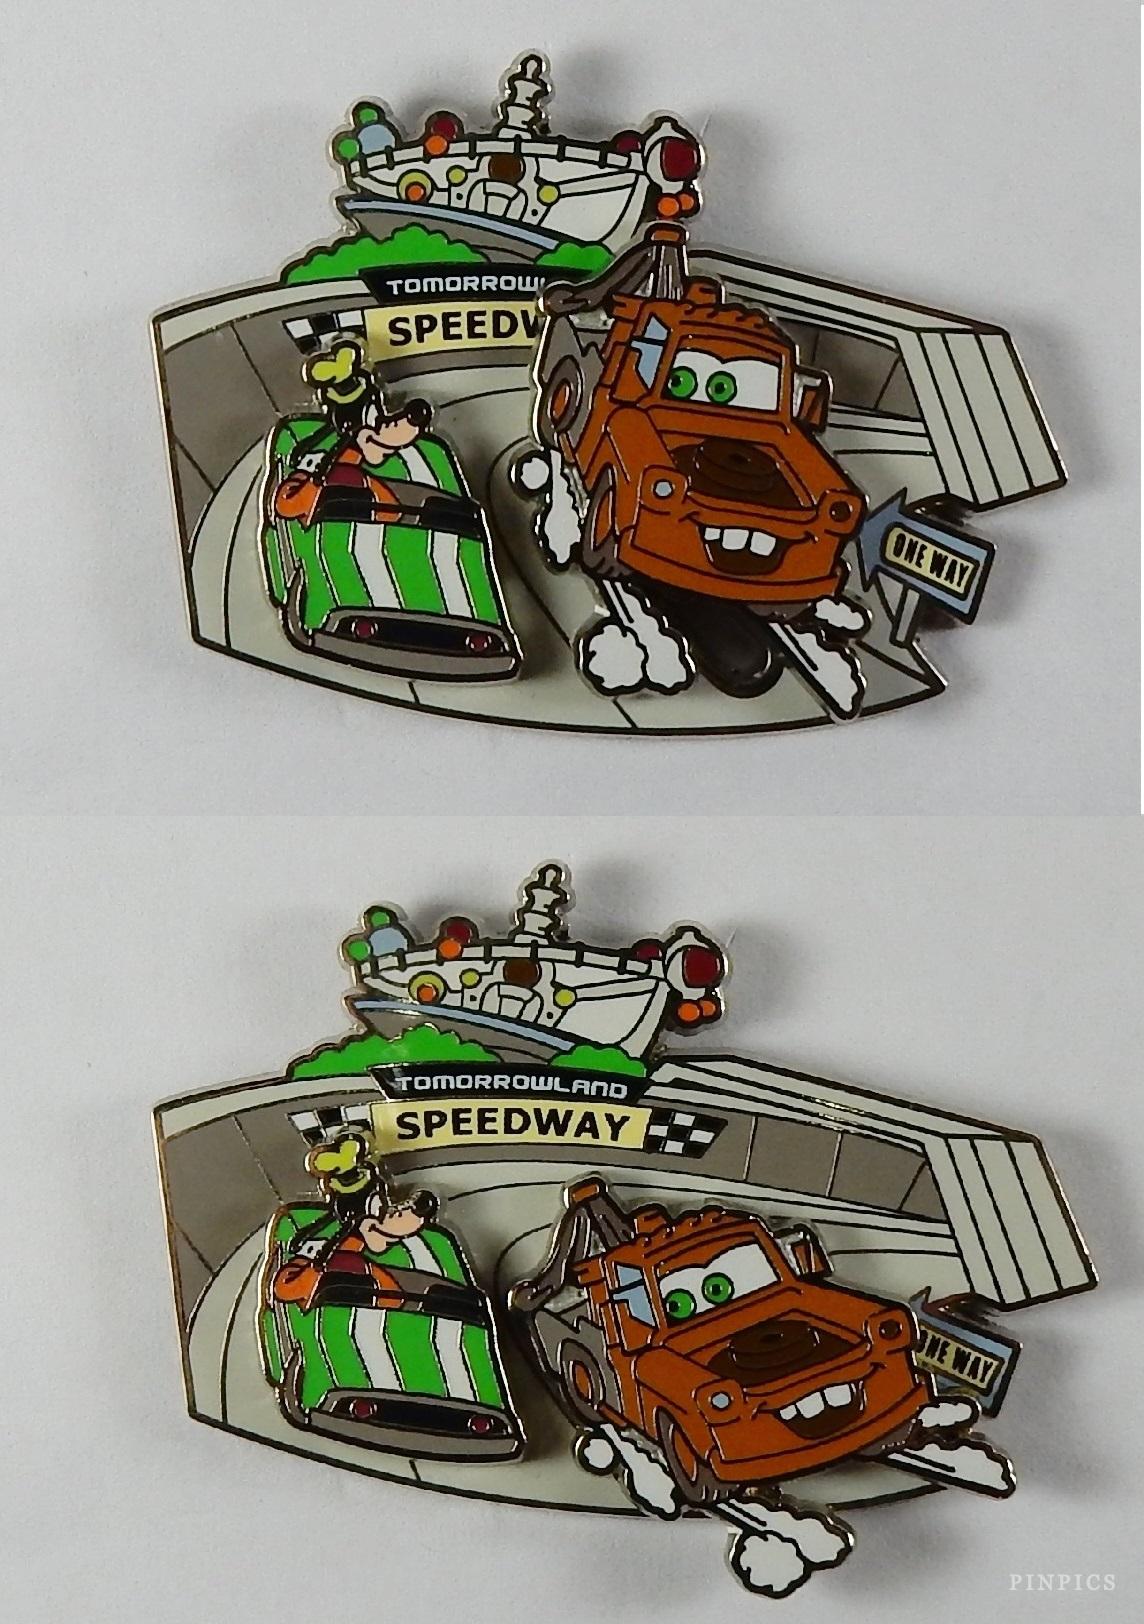 WDW - Where Dreams HapPIN - Disney Pin Celebration 2007 - Tow Mater Speedway